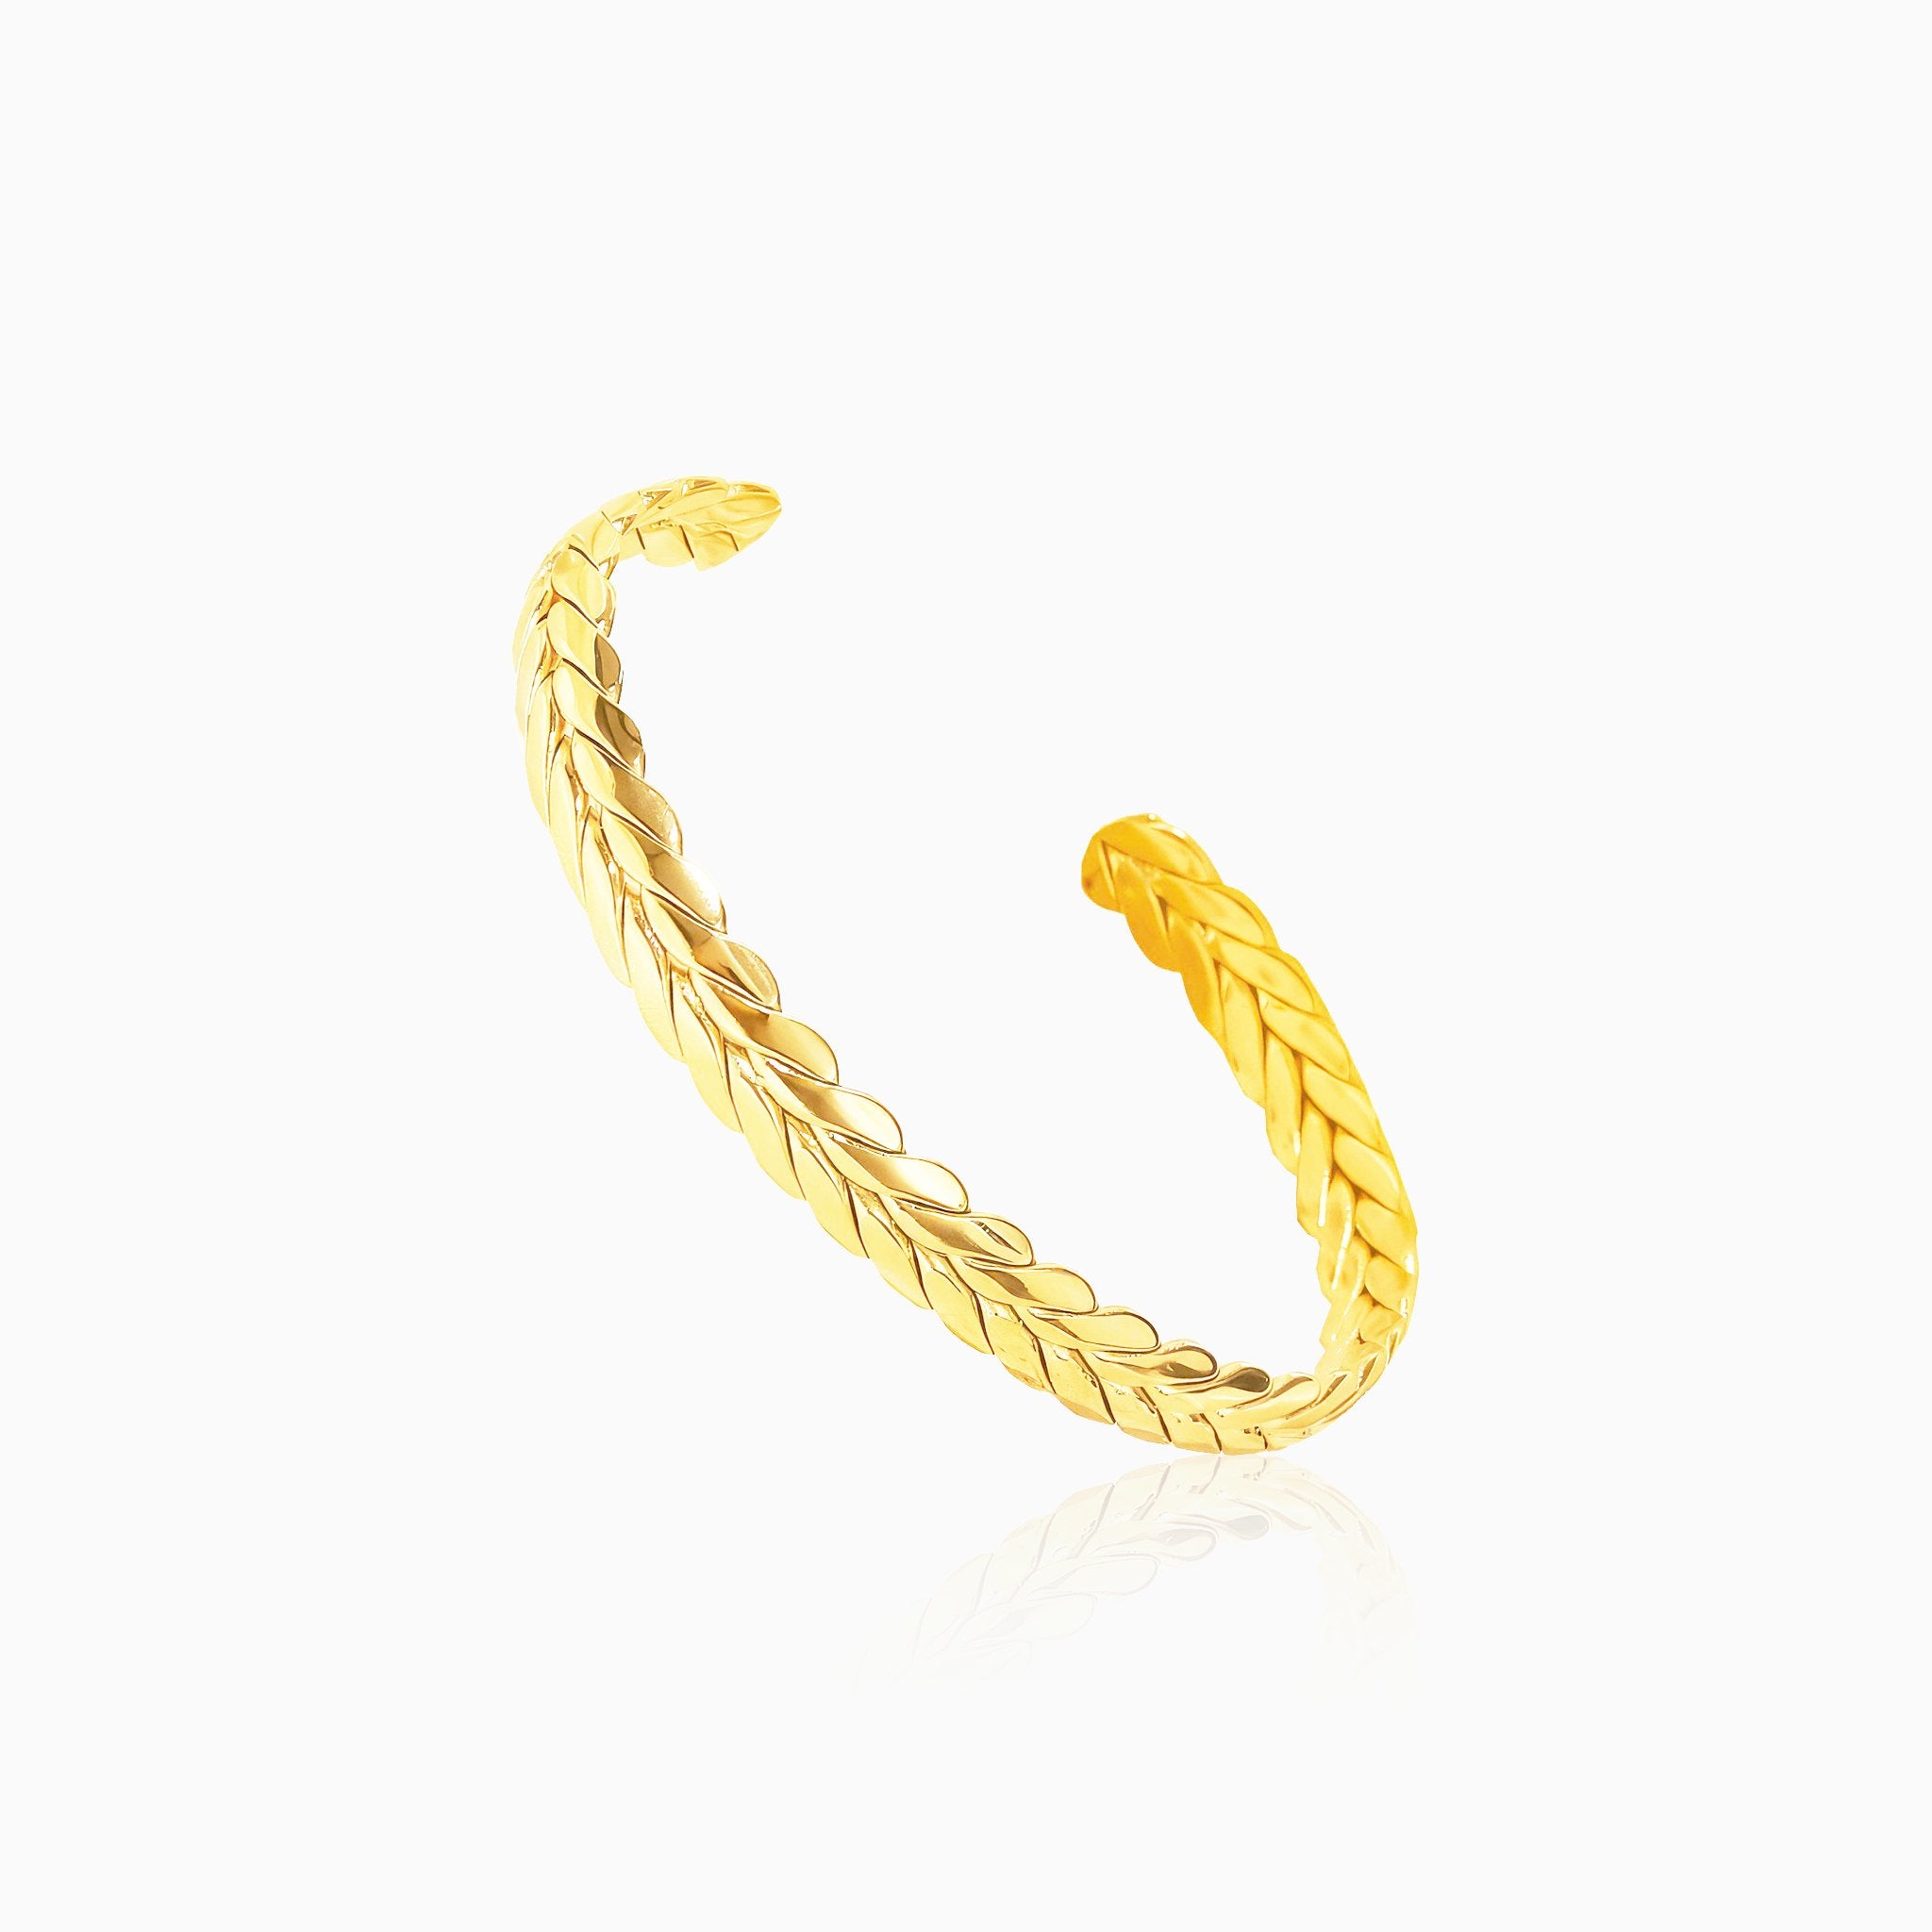 Wheat Ear Shaped Open Bangle - Nobbier - Bangle - 18K Gold And Titanium PVD Coated Jewelry